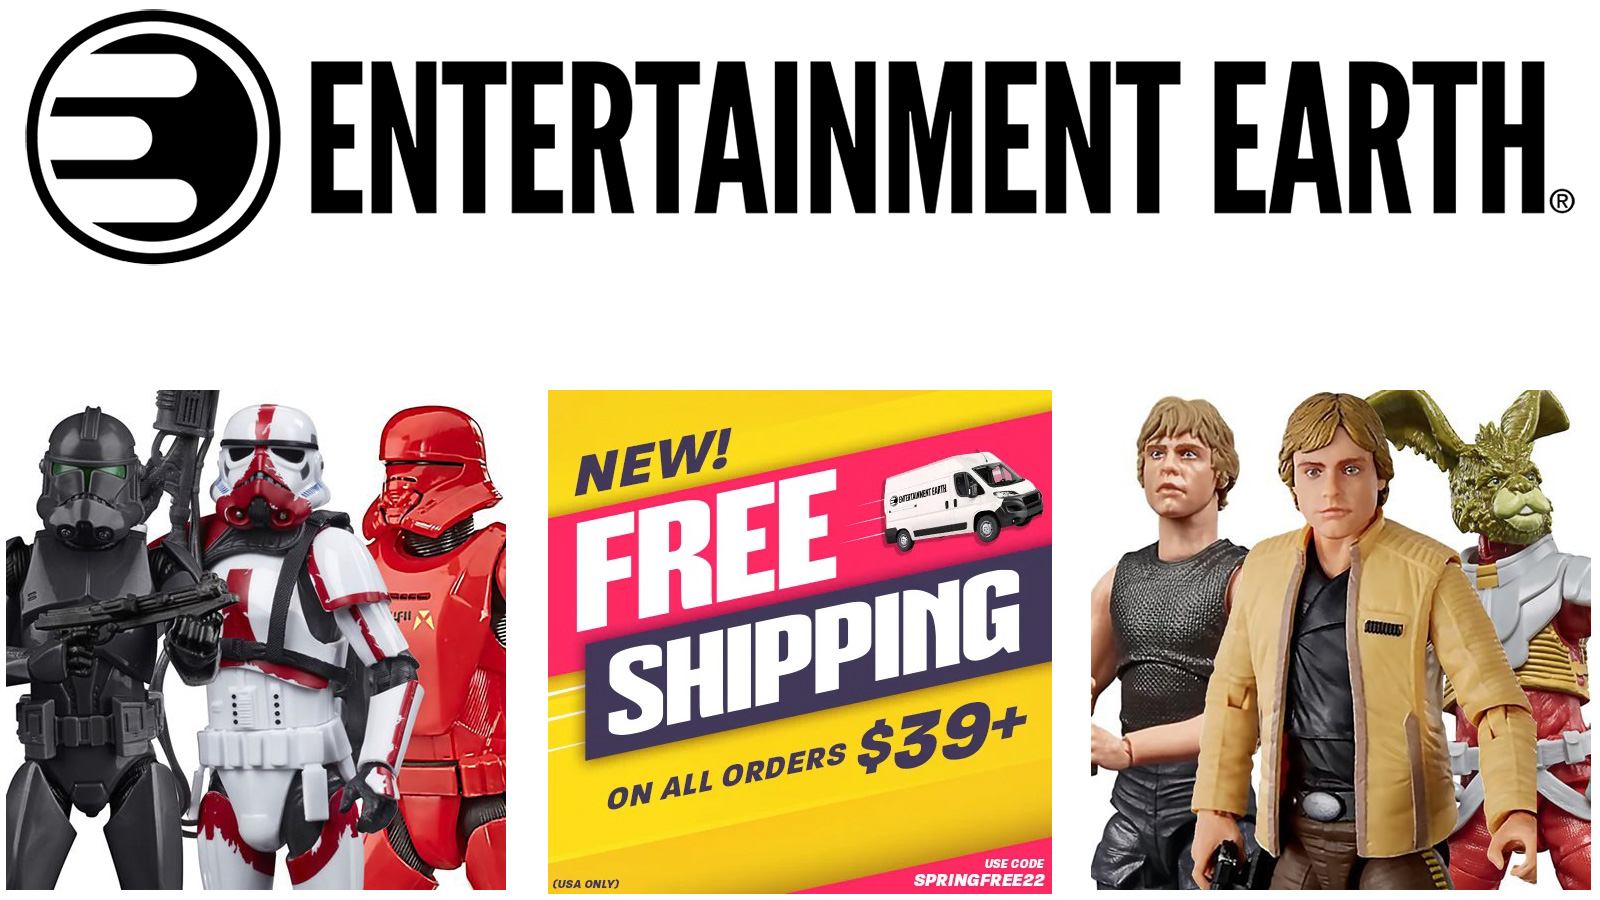 Free Shipping On Orders Of $39+ At Entertainment Earth - Also TBS 6-Inch Trooper Bundle For $50